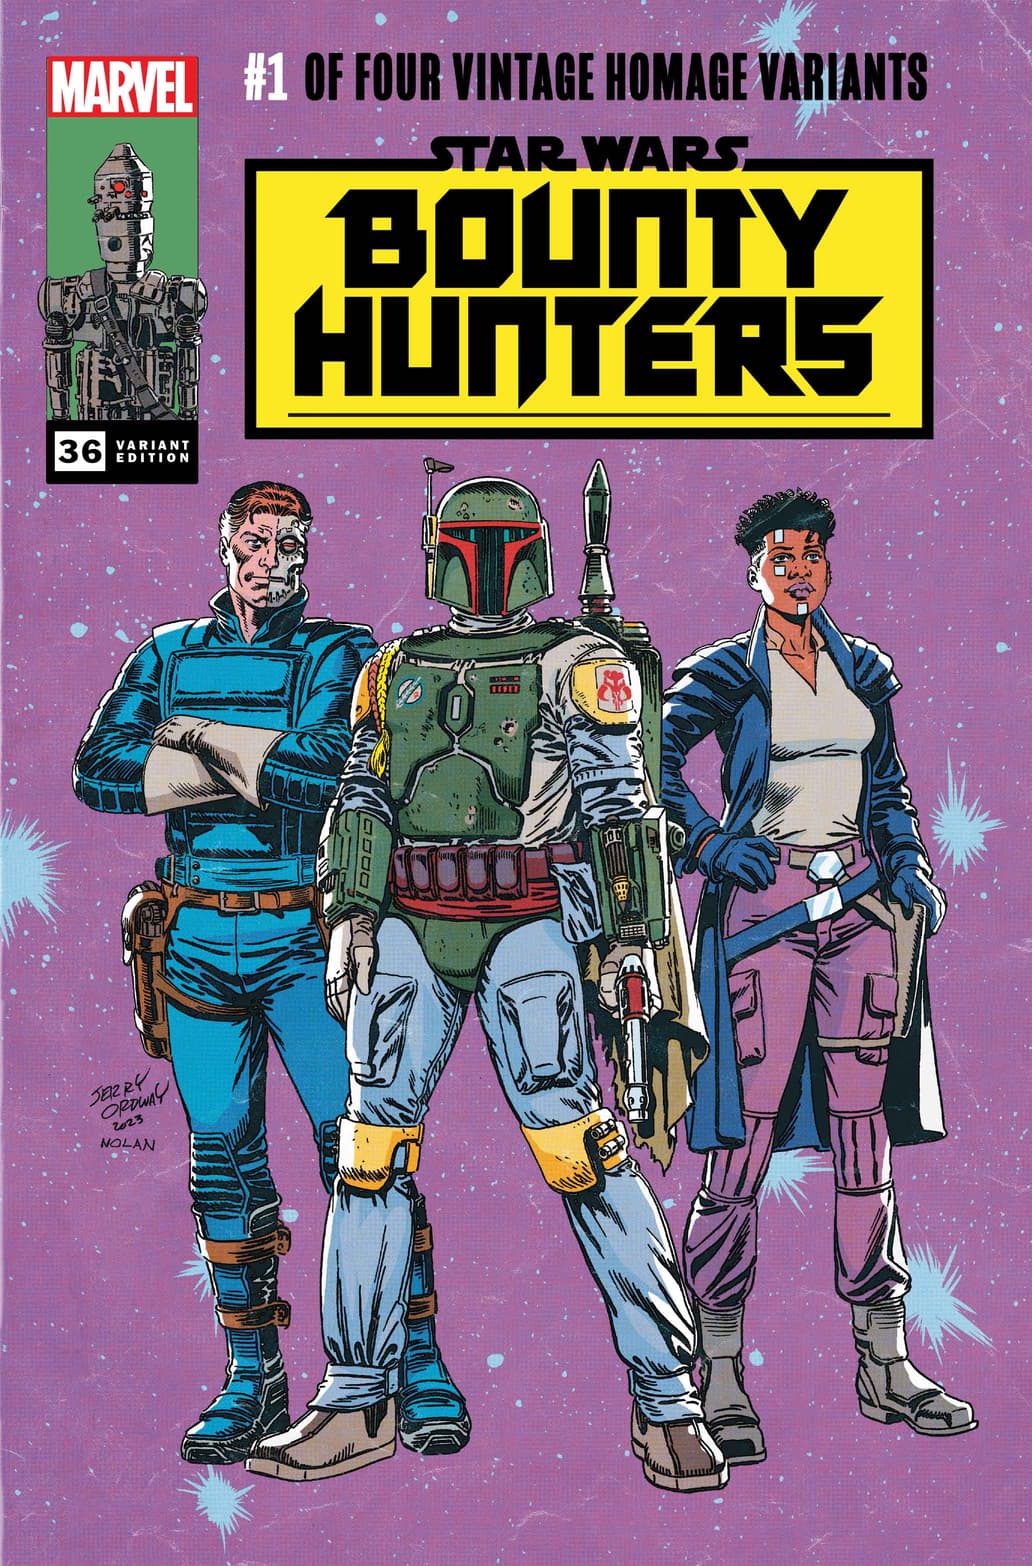 STAR WARS: BOUNTY HUNTERS #36 Classic Trade Dress Variant Cover by Jerry Ordway and Nolan Woodward